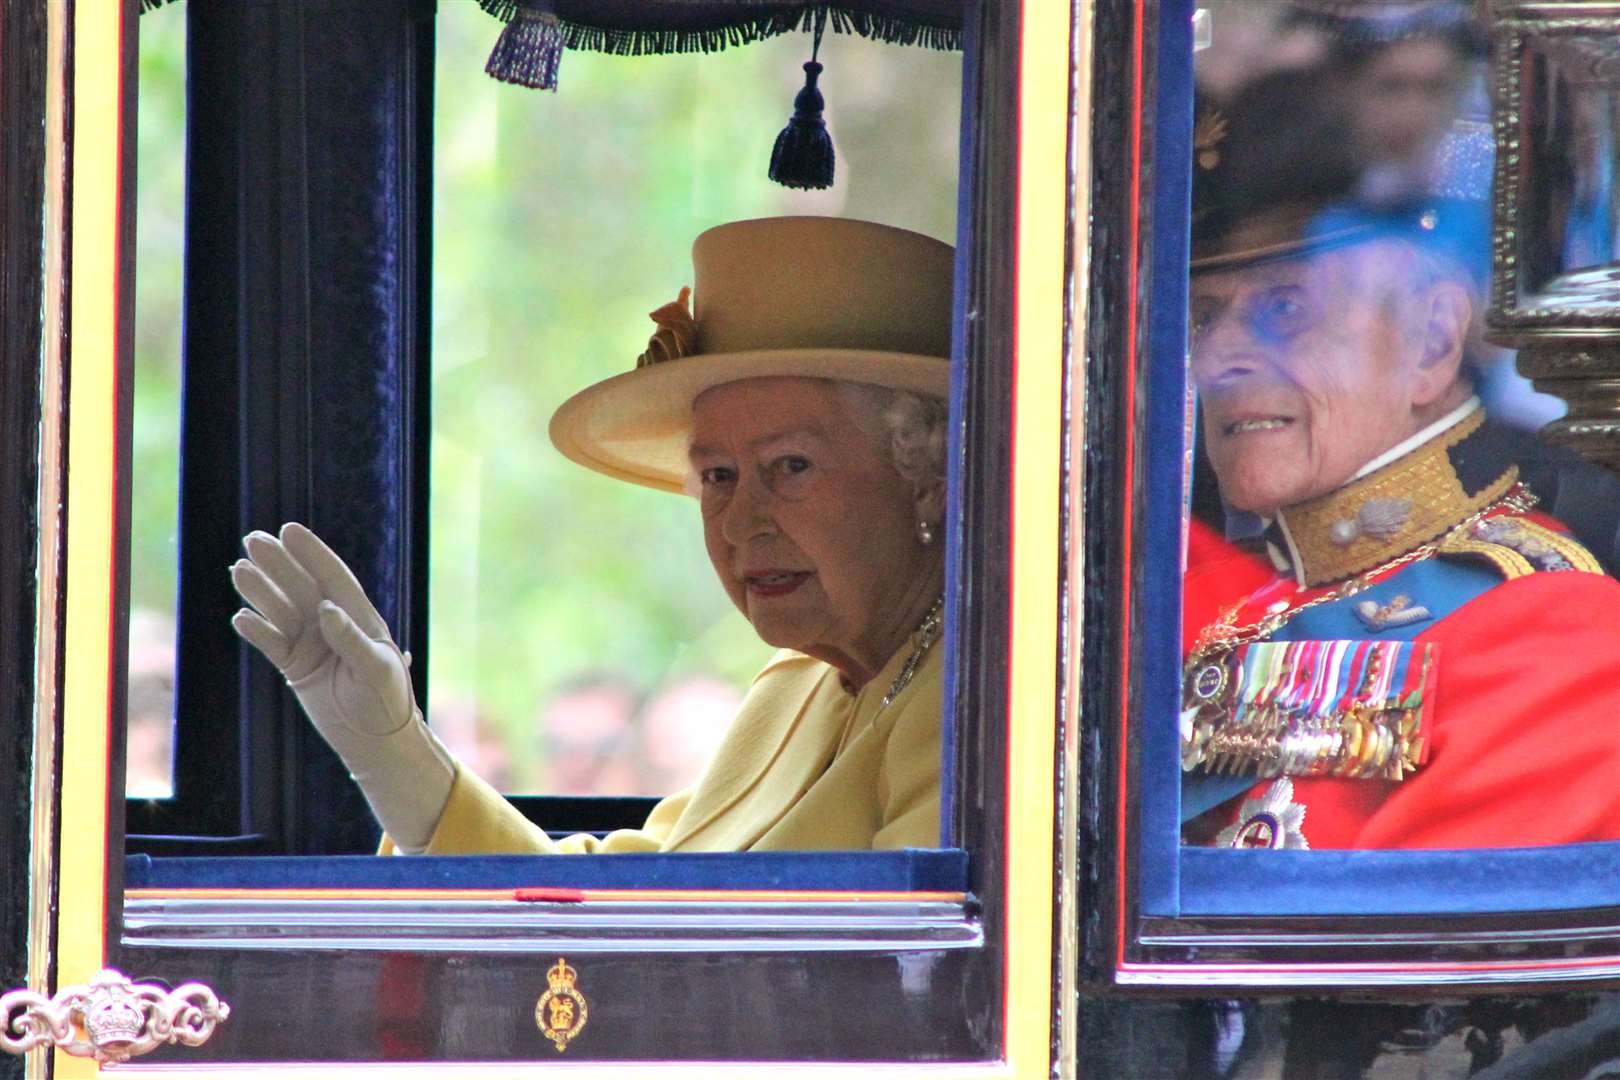 The Queen, pictured with the Duke of Edinburgh in 2012, celebrates her Platinum Jubilee this year